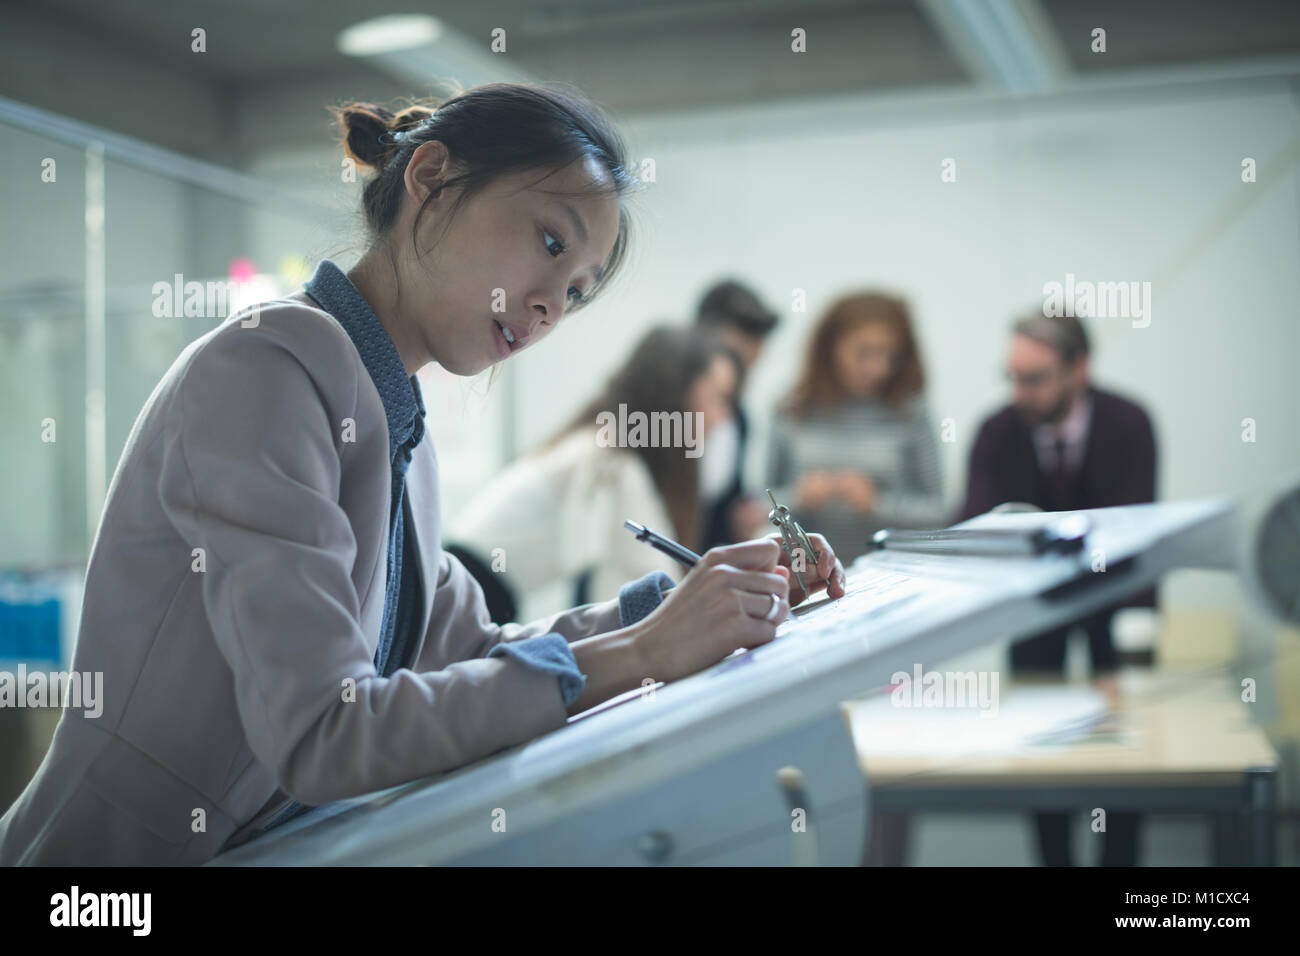 Female executive working over drafting table Stock Photo